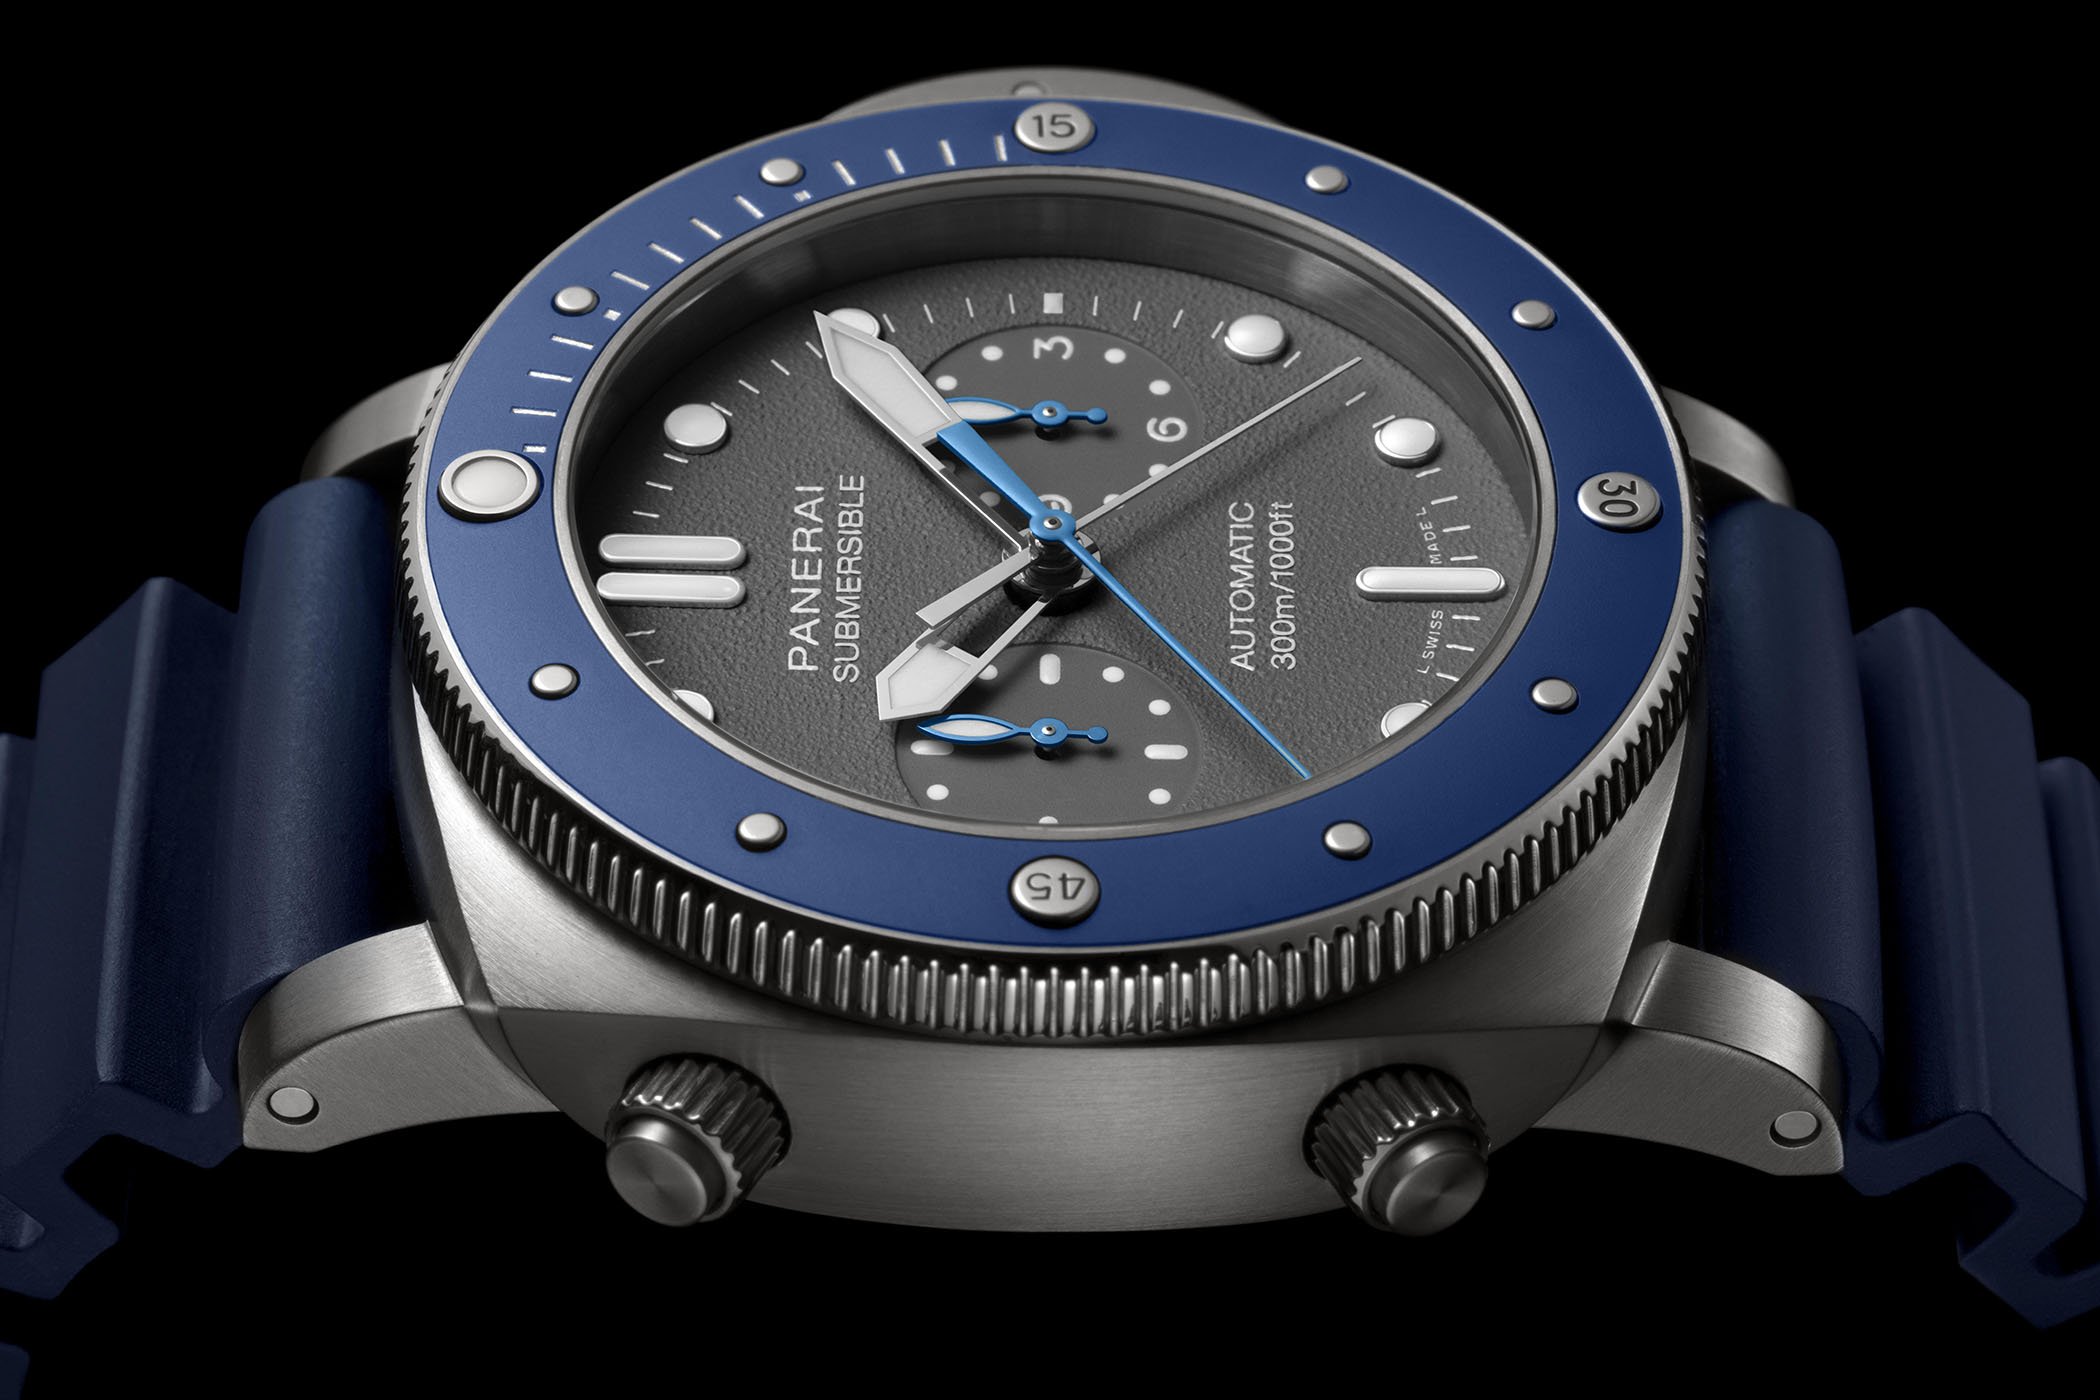 Panerai Submersible Chrono Guillaume Nery Edition PAM00982 - Pre-SIHH 2019